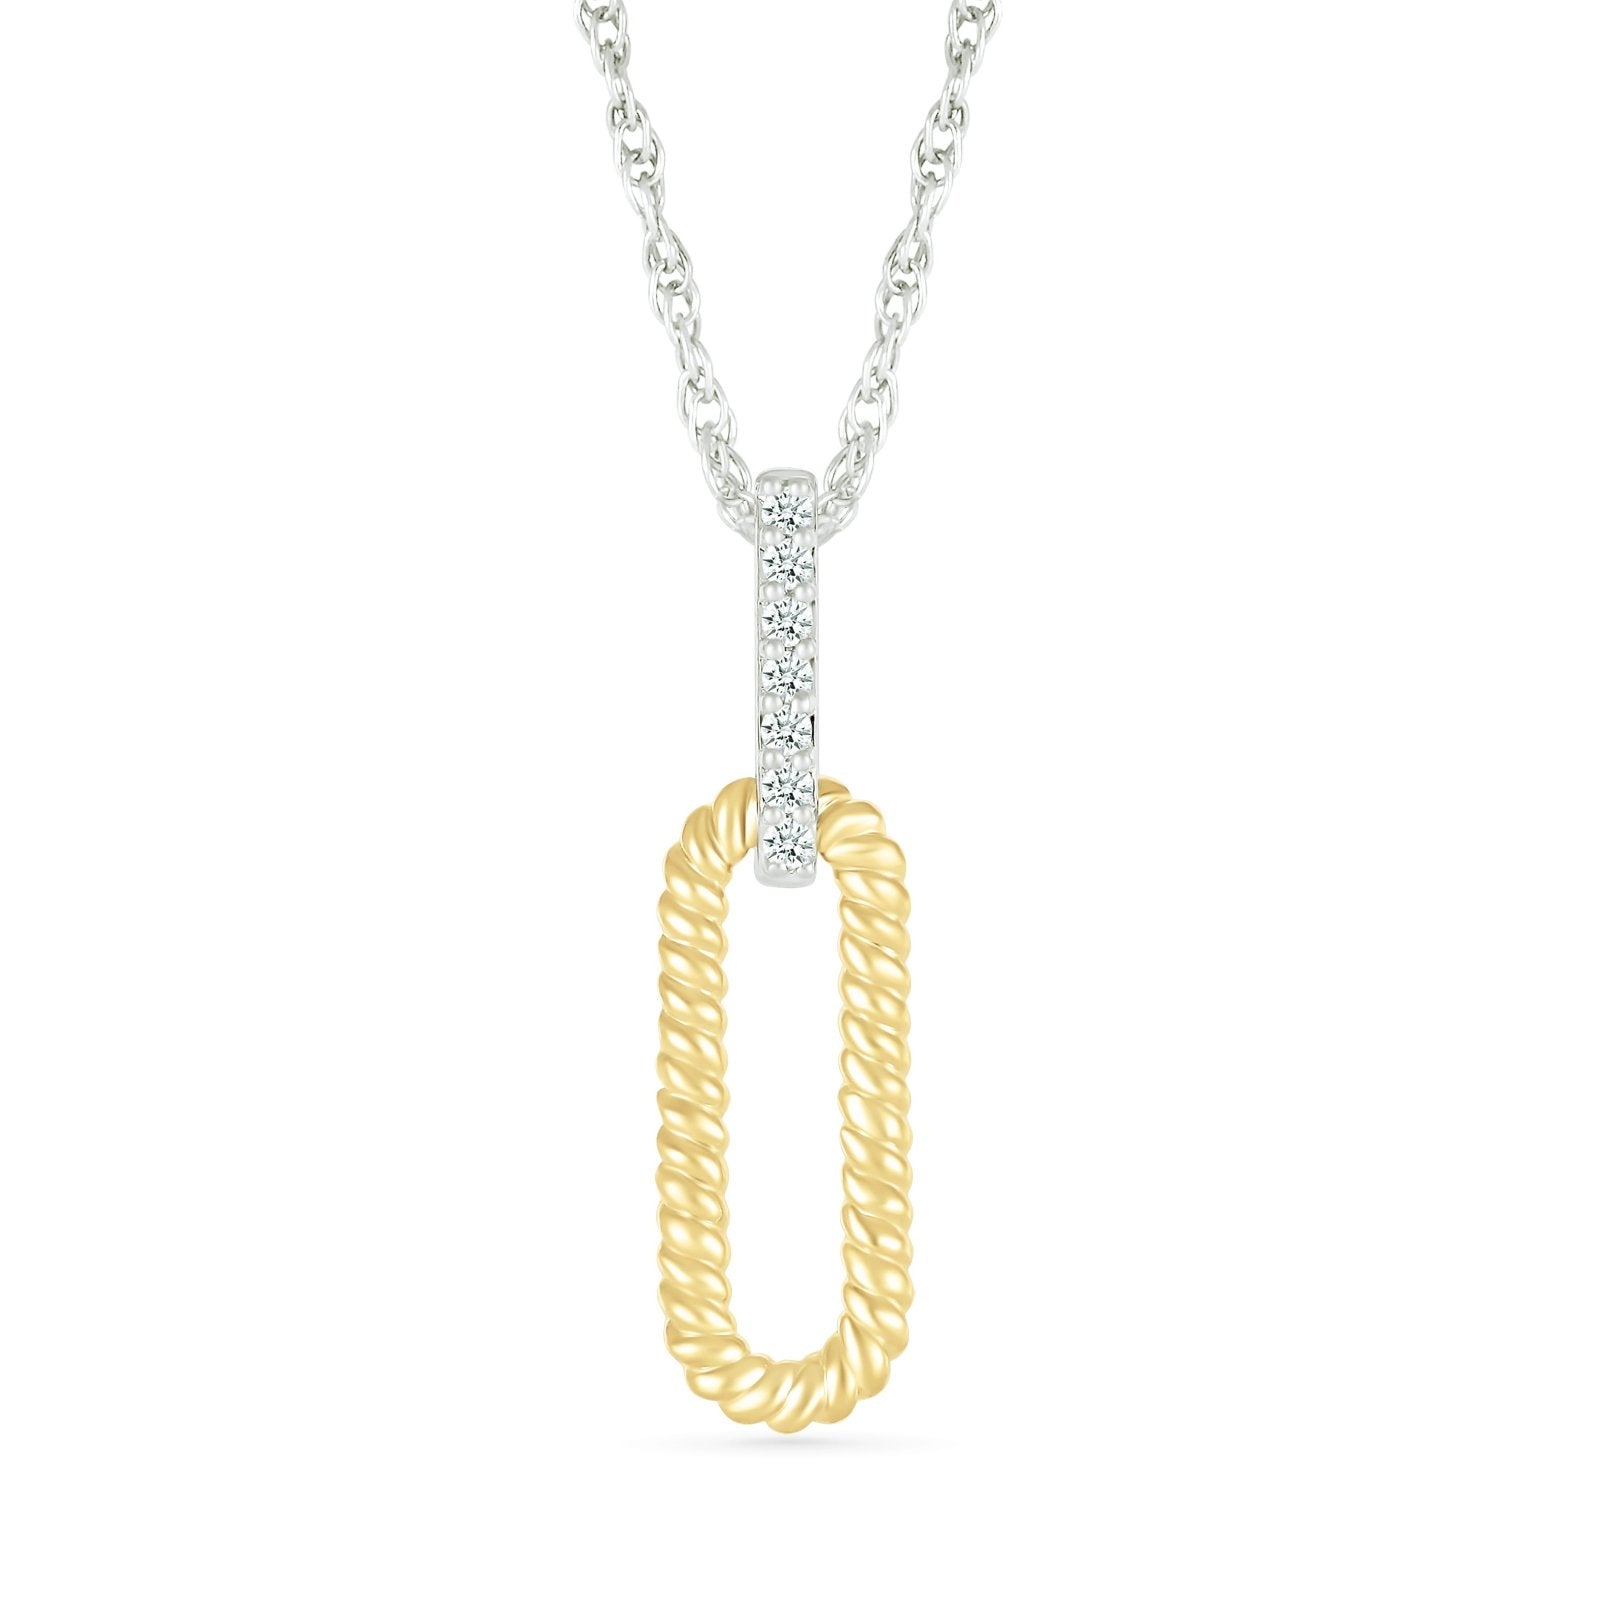 Interlocking Braided Gold and Diamond Paperclip Necklace Necklaces Estella Collection #product_description# 32718 925 Diamond Made to Order #tag4# #tag5# #tag6# #tag7# #tag8# #tag9# #tag10#